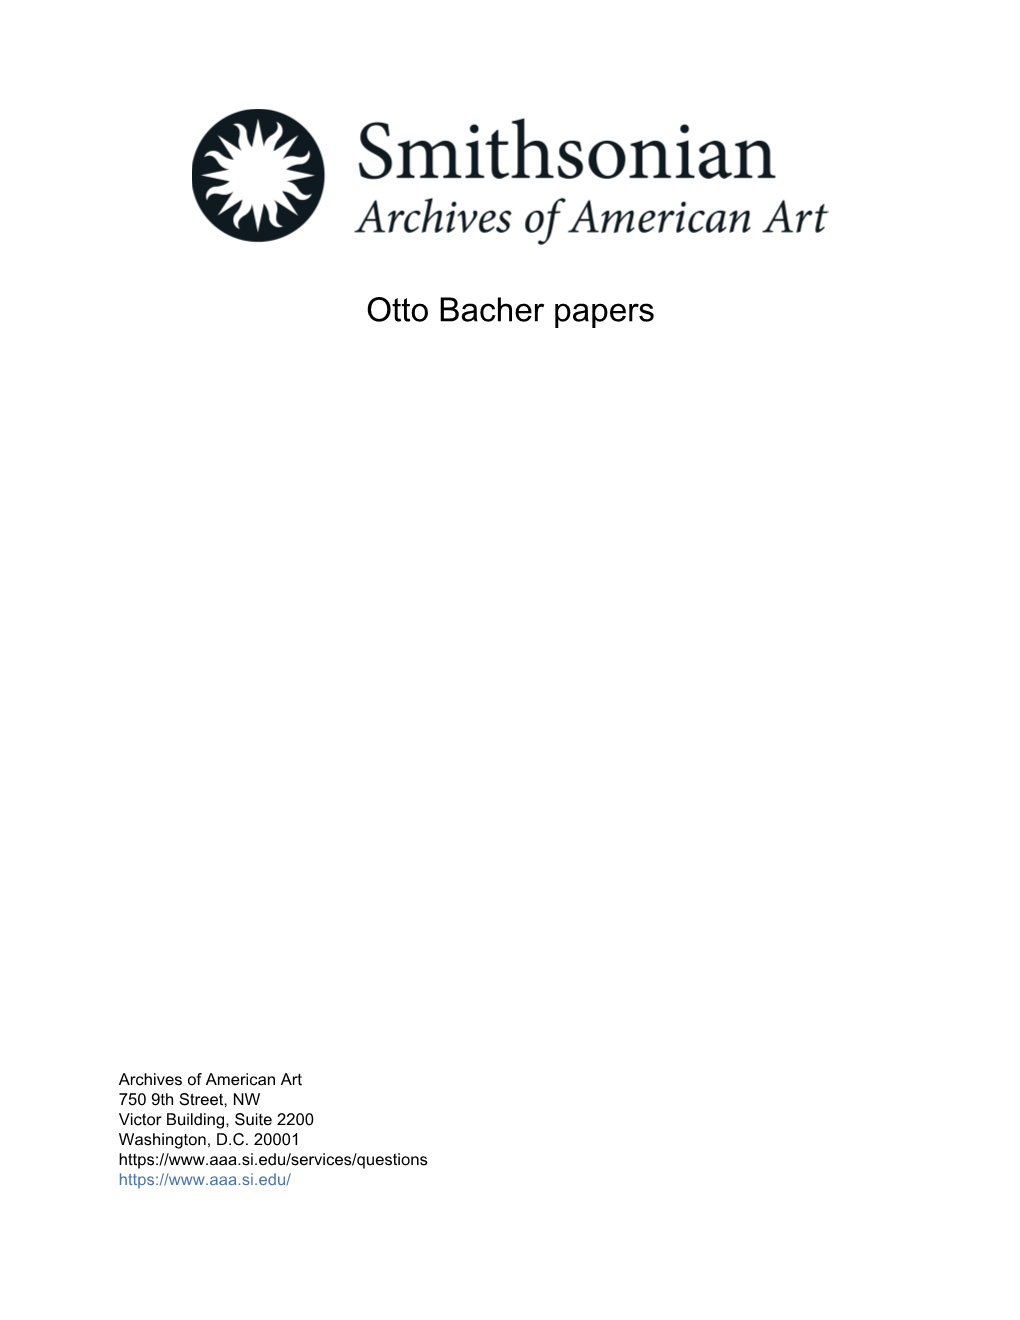 Otto Bacher Papers